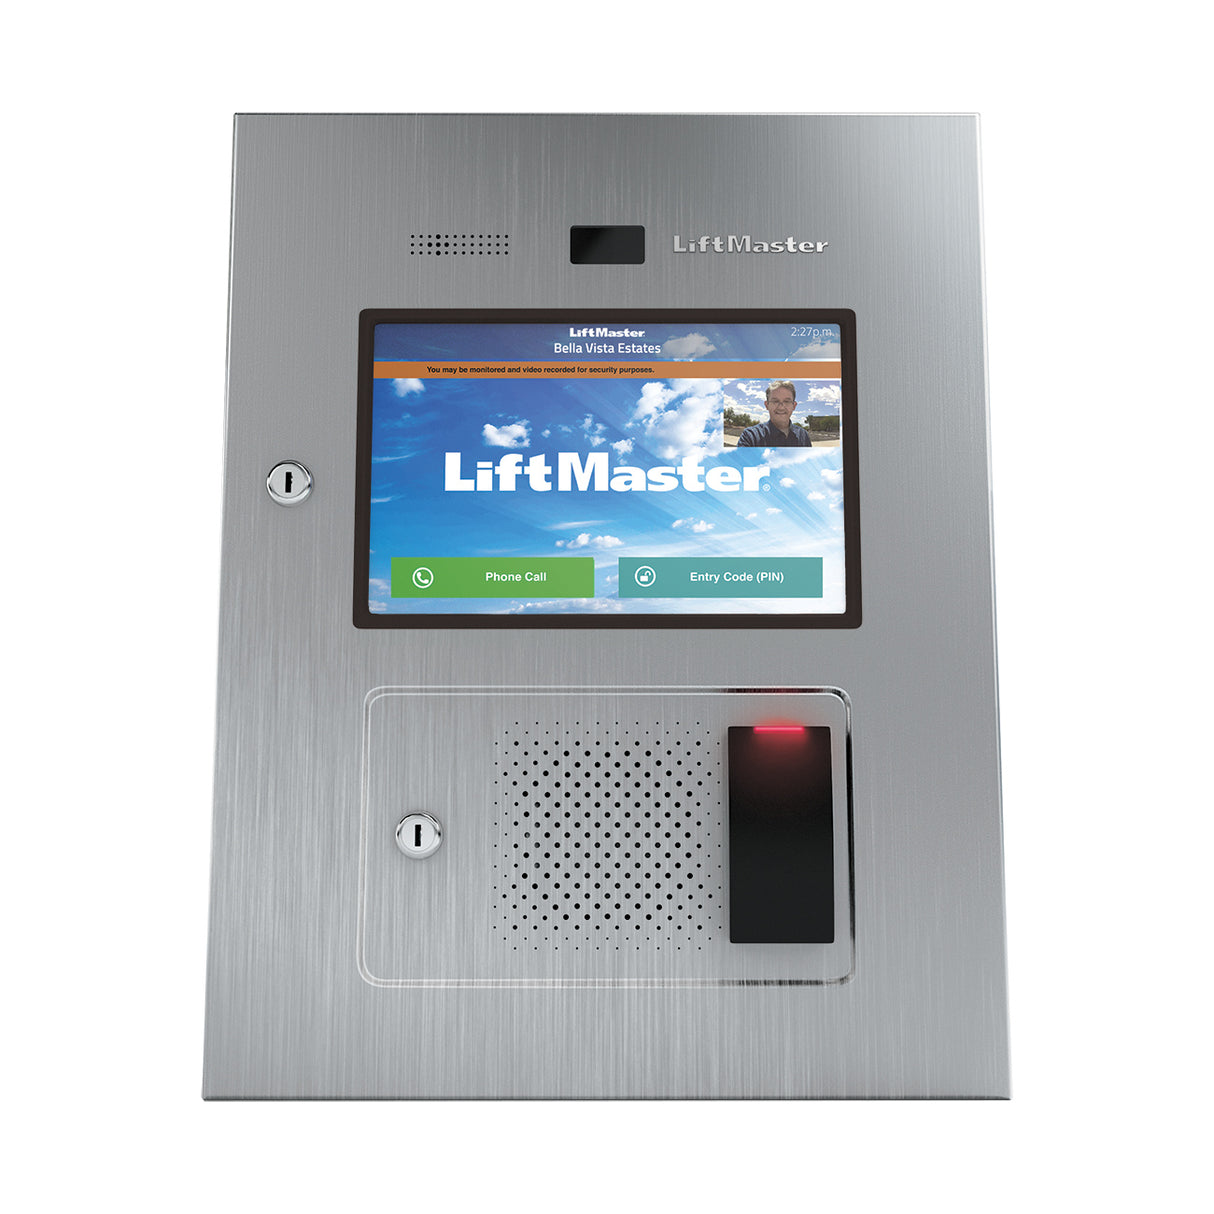 Touch Screen Internet-Connected Video Intercom